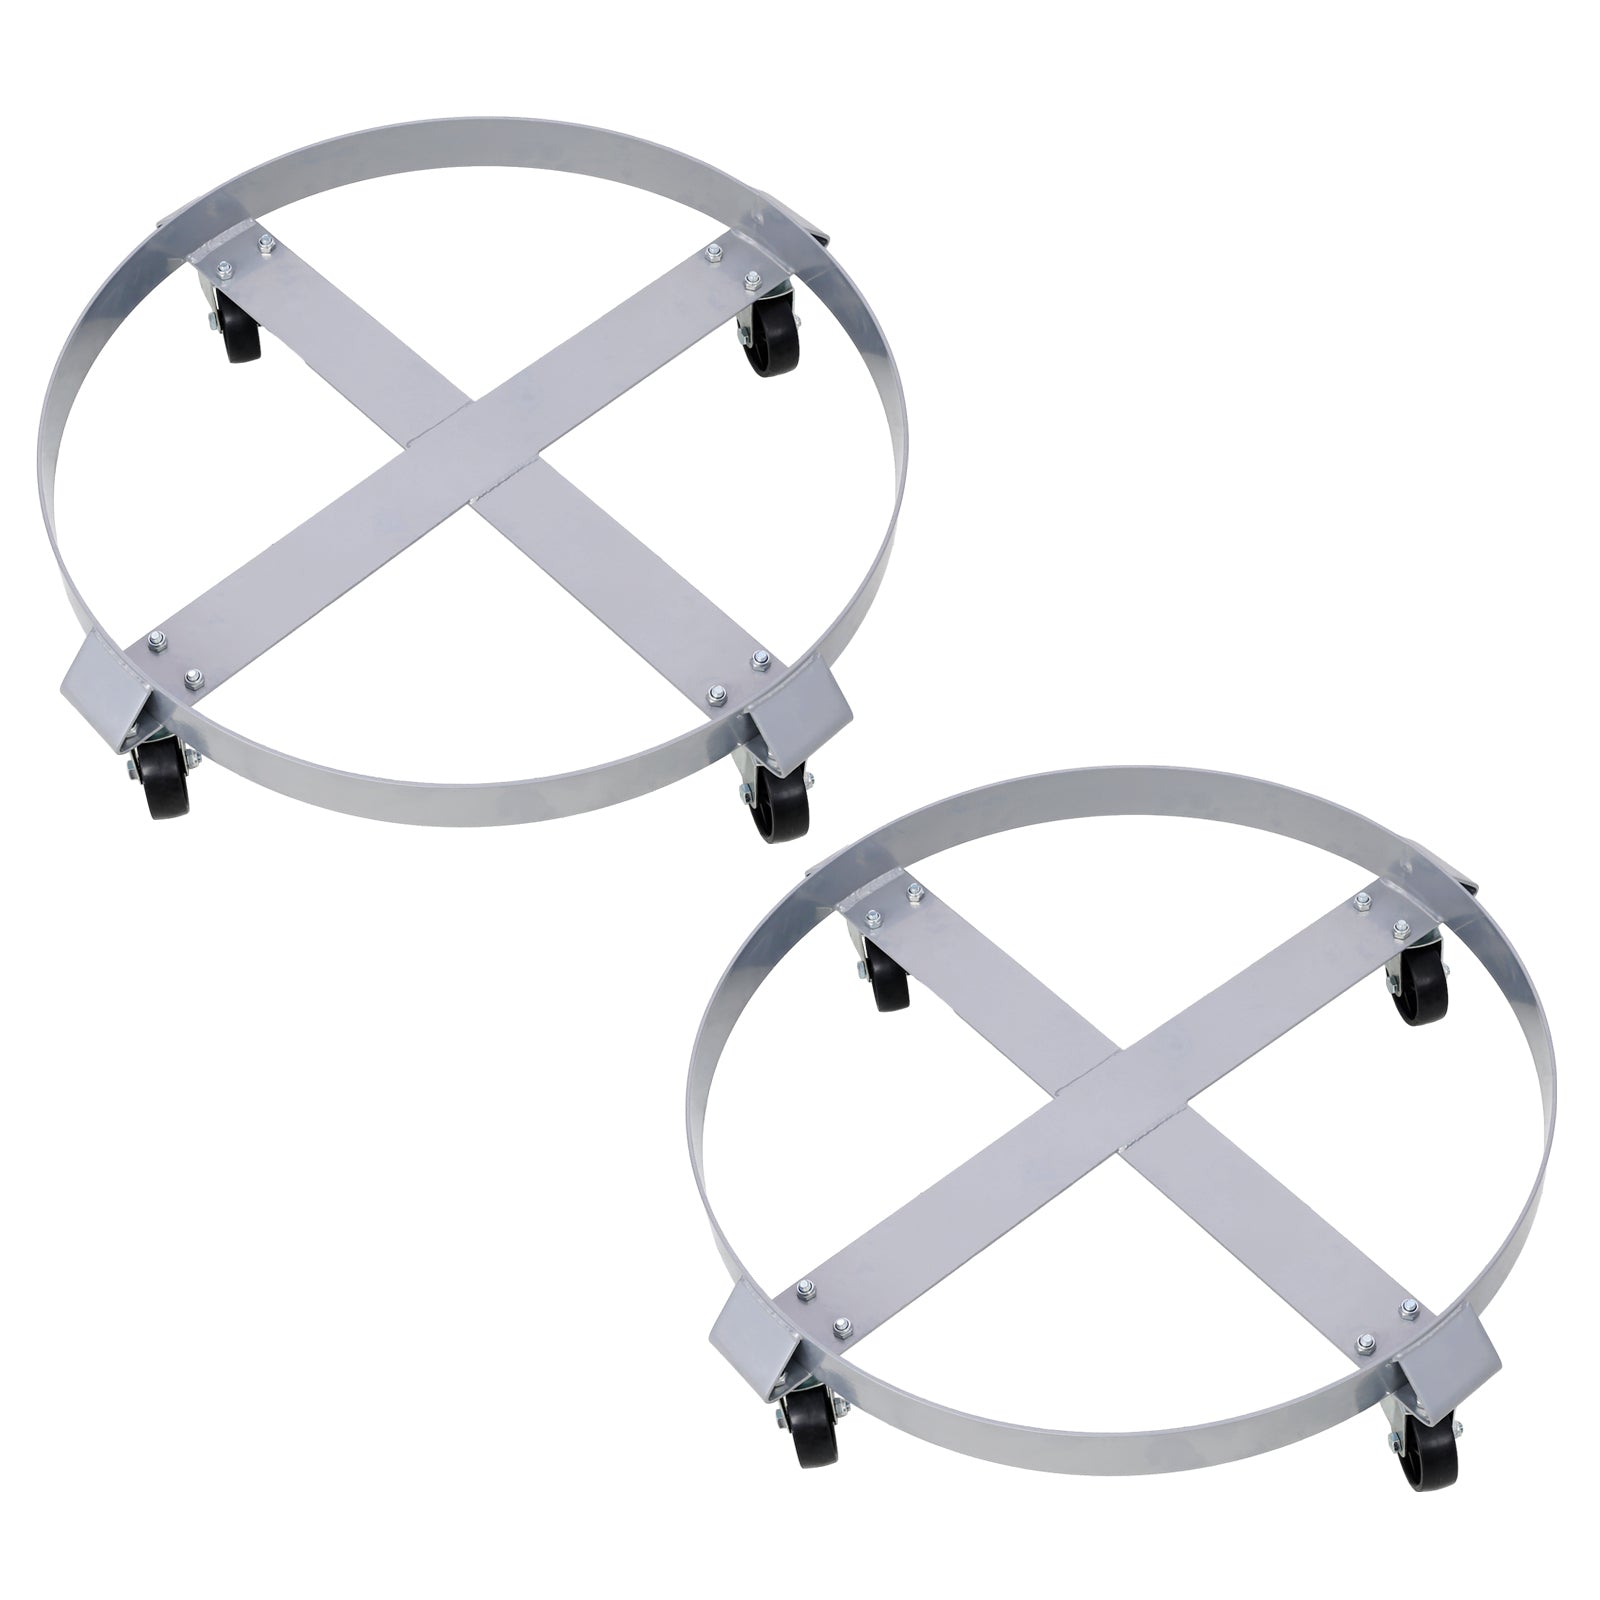 2Pcs Drum Dolly for 55 Gallon Drums,Barrel Dolly with